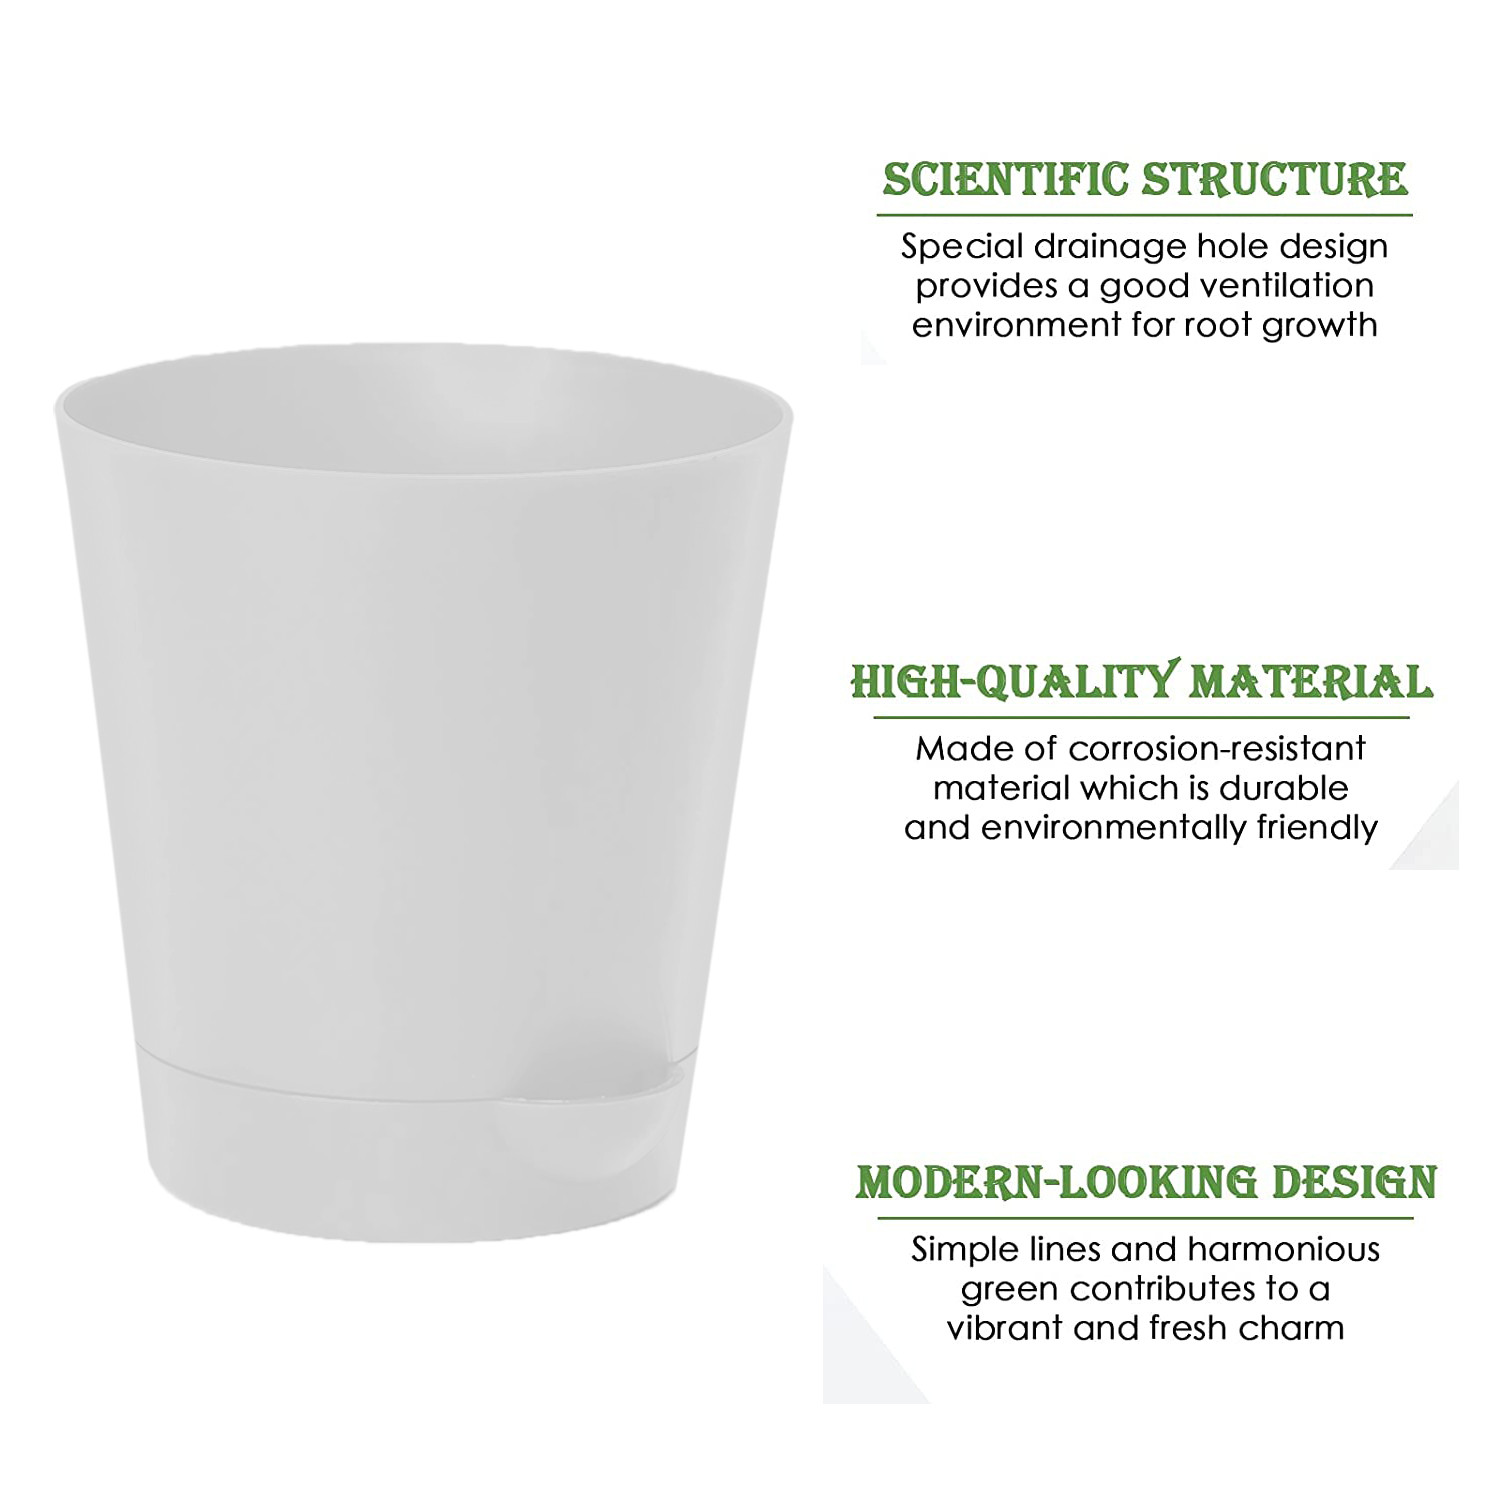 Kuber Industries Plastic Titan Pot|Garden Container For Plants & Flowers|Self-Watering Pot With Drainage Holes,6 Inch (White)